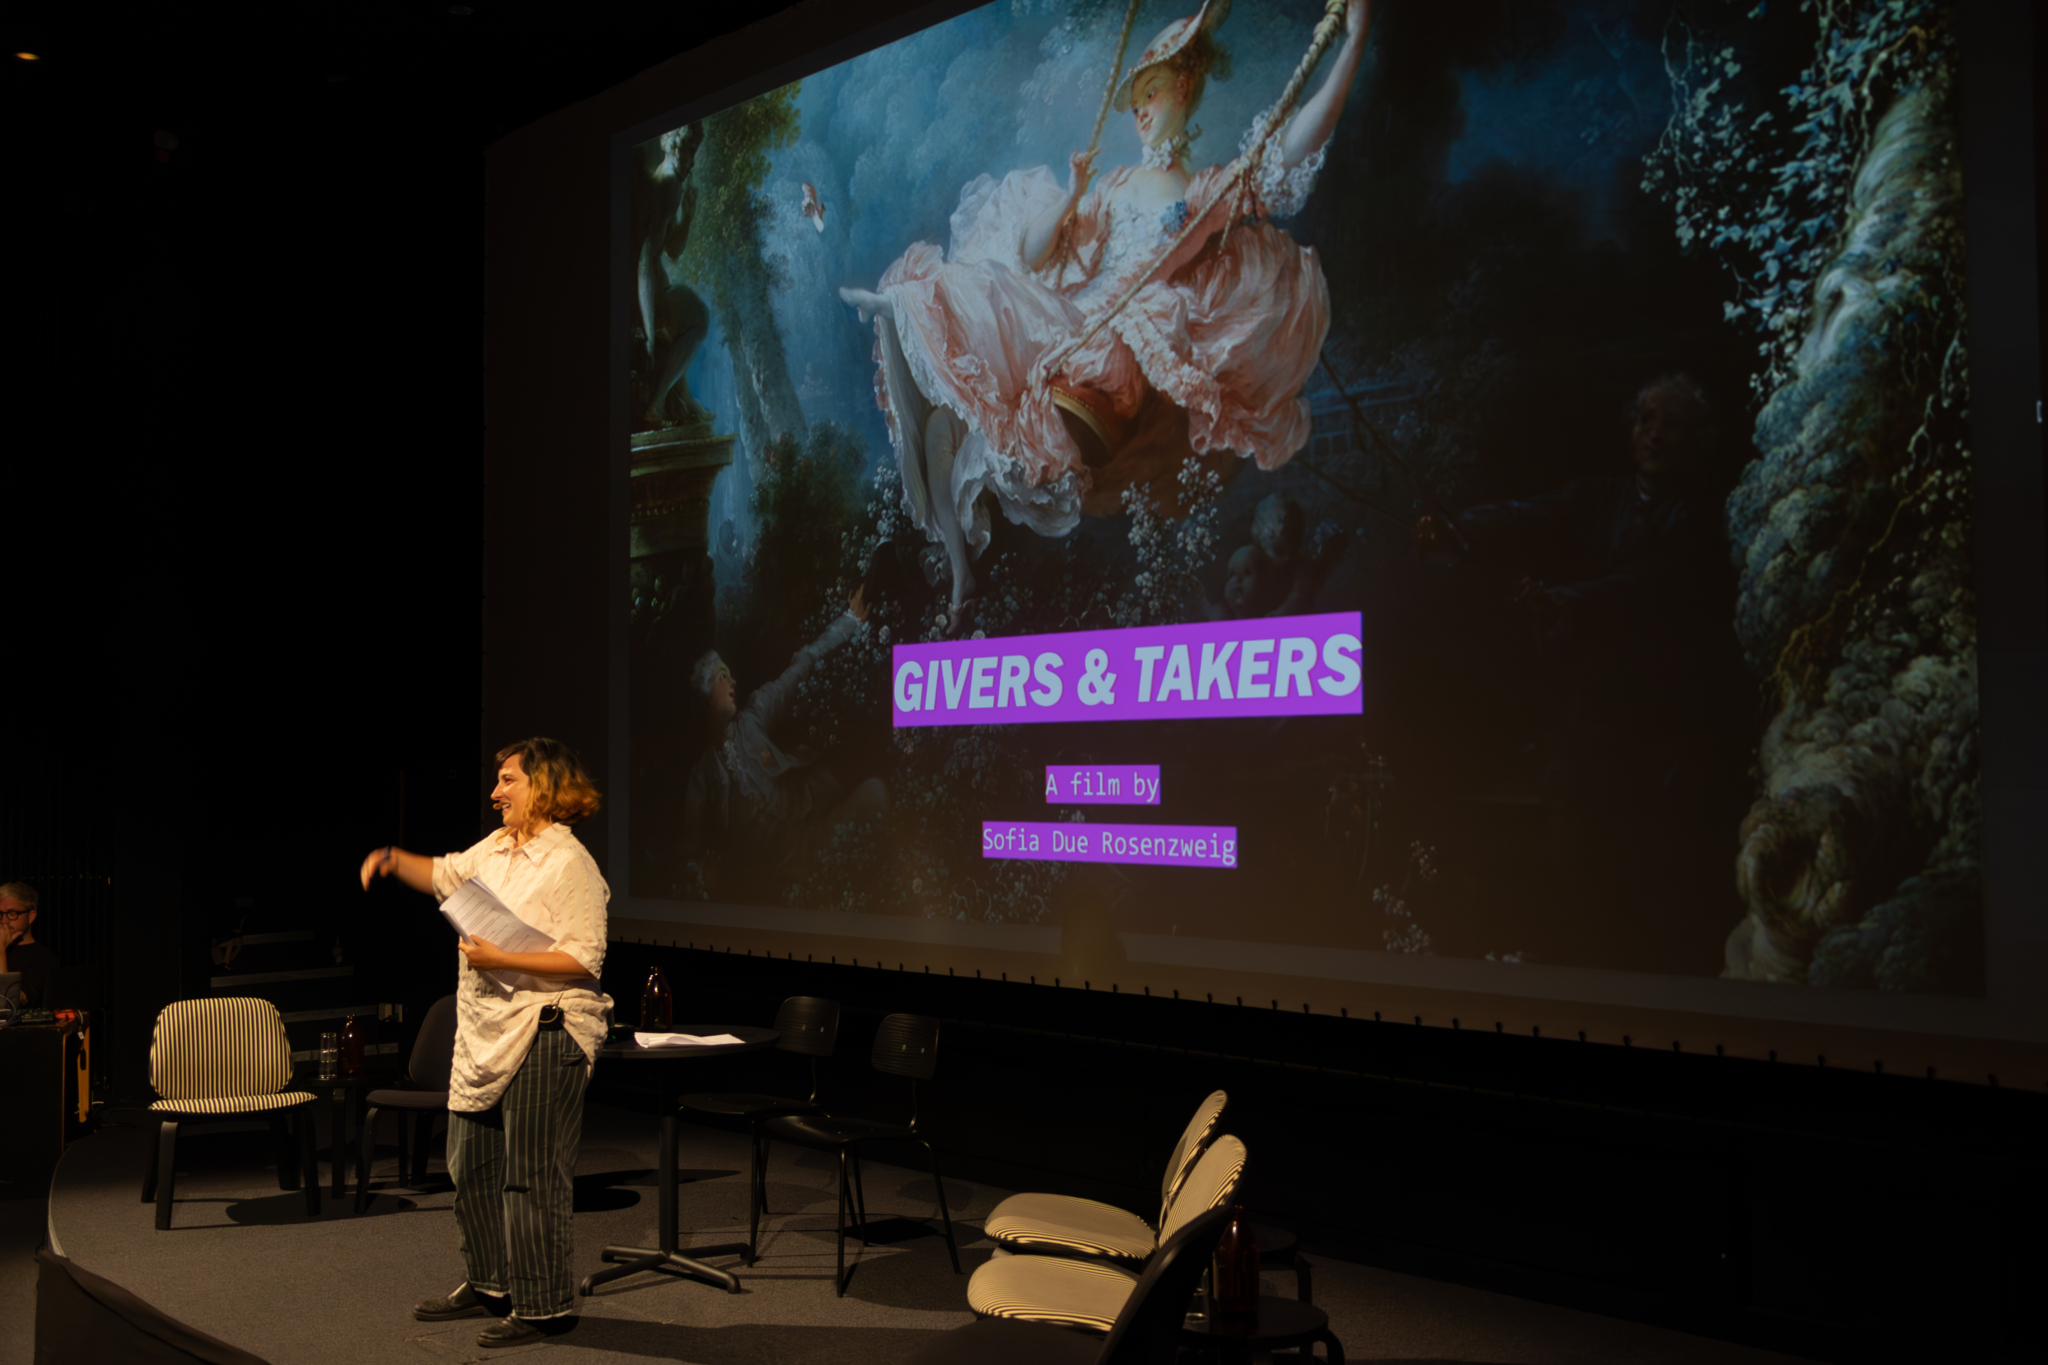 Givers & Takers © Nordic Talents, Torleif Hauge, NFTVF